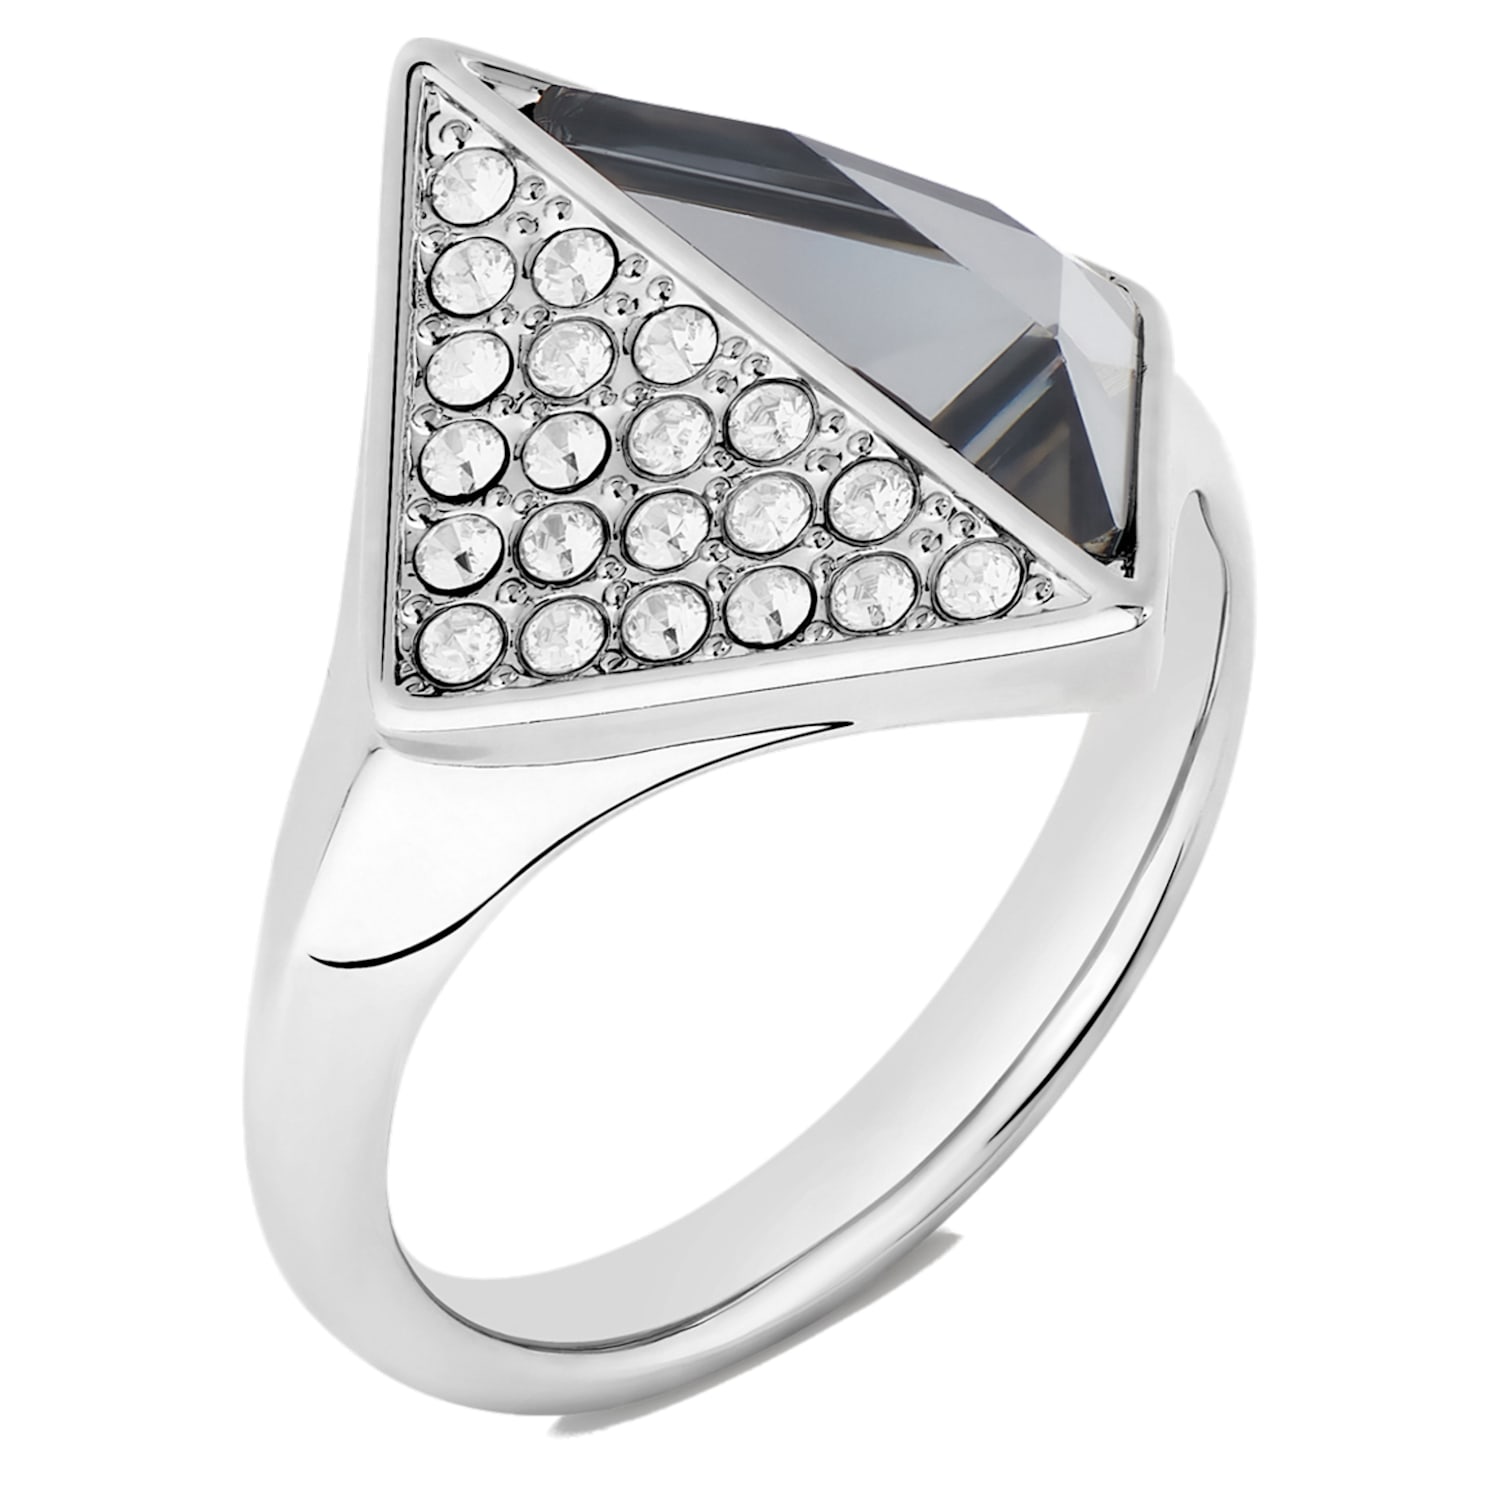 Women's K/IKONIK PAVE KARL AND CHOUPETTE RING by KARL LAGERFELD | Free  Shipping and Returns